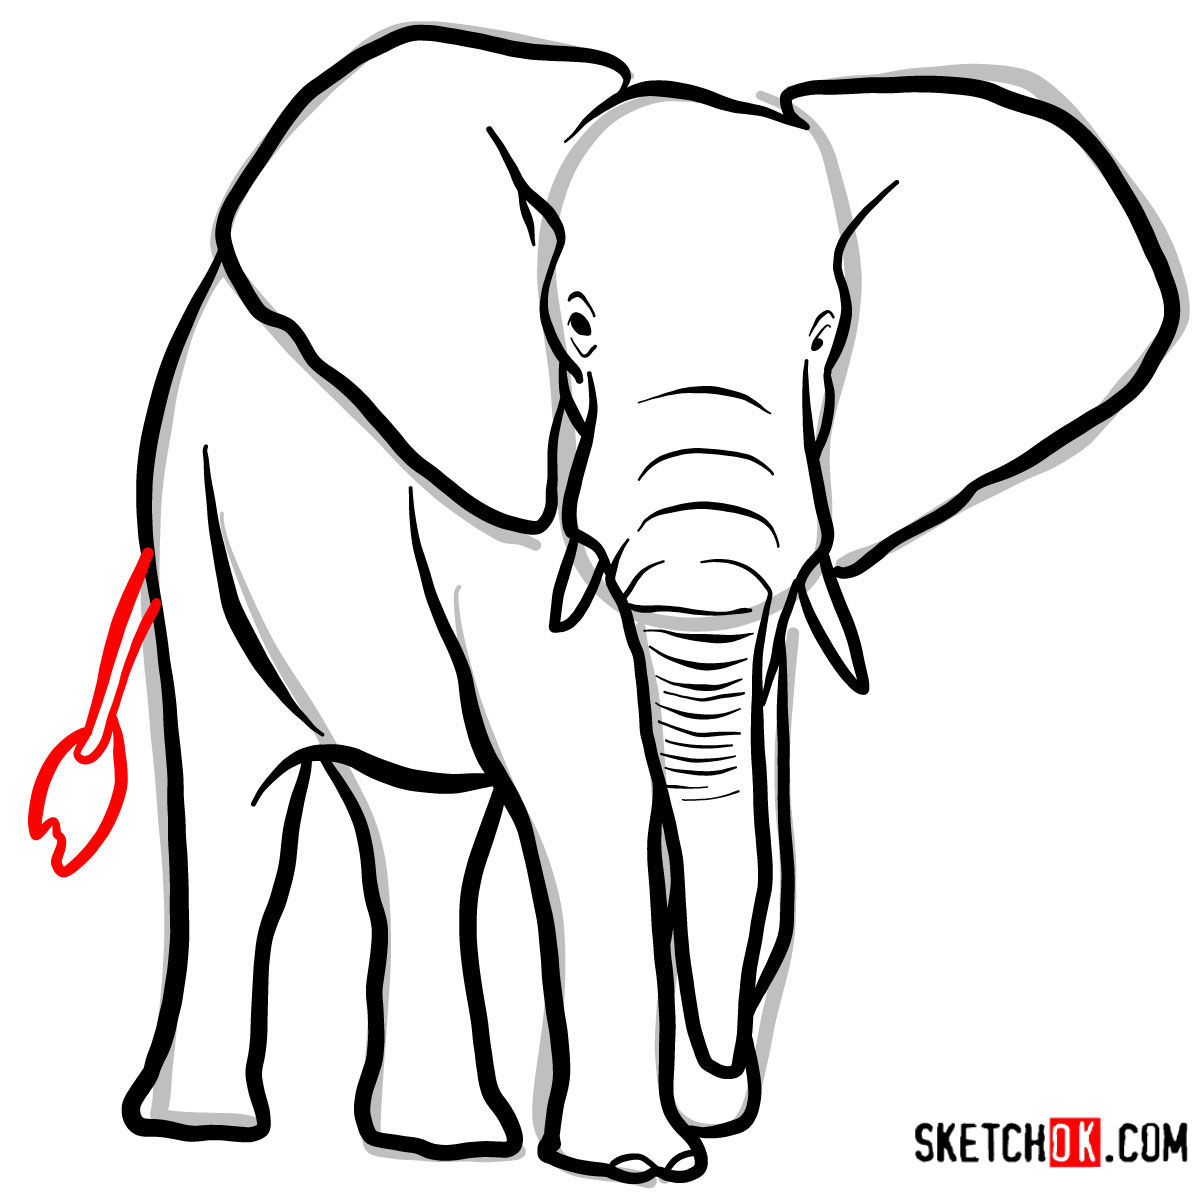 Elephant Drawing In 6 Steps For Beginners [Video + Images]